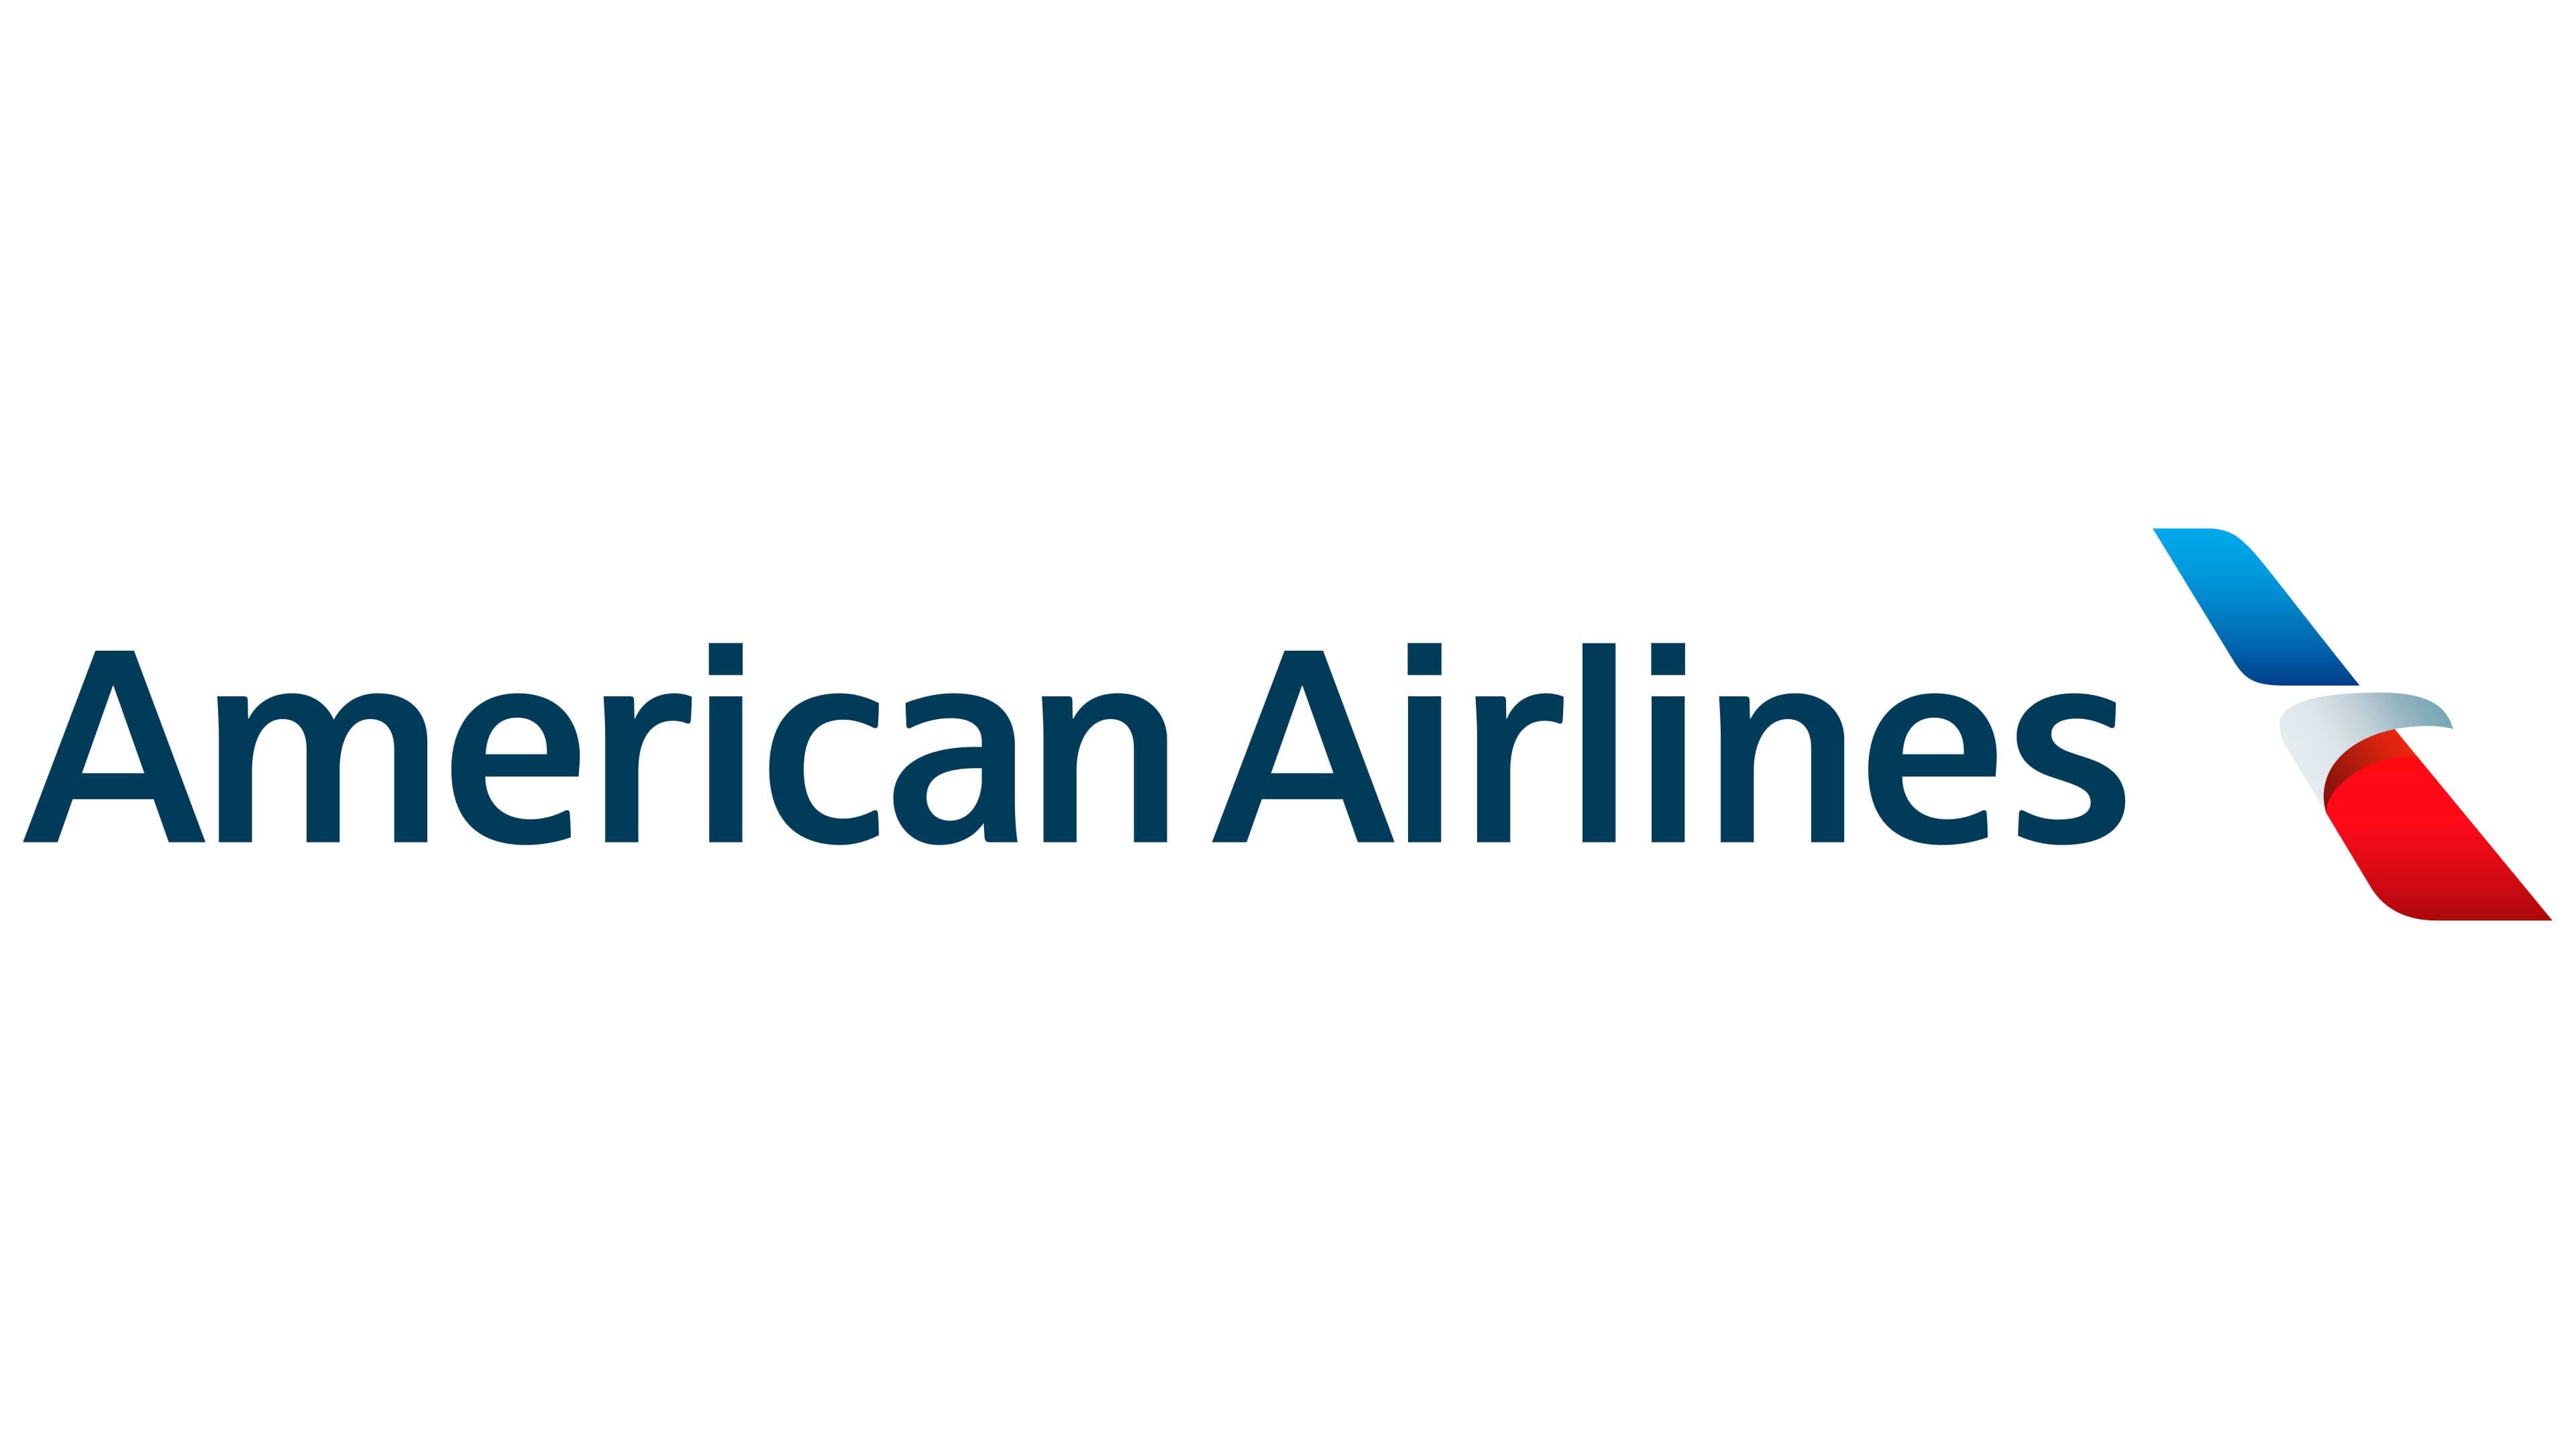 American Airlines Logo, PNG, Symbol, History, Meaning